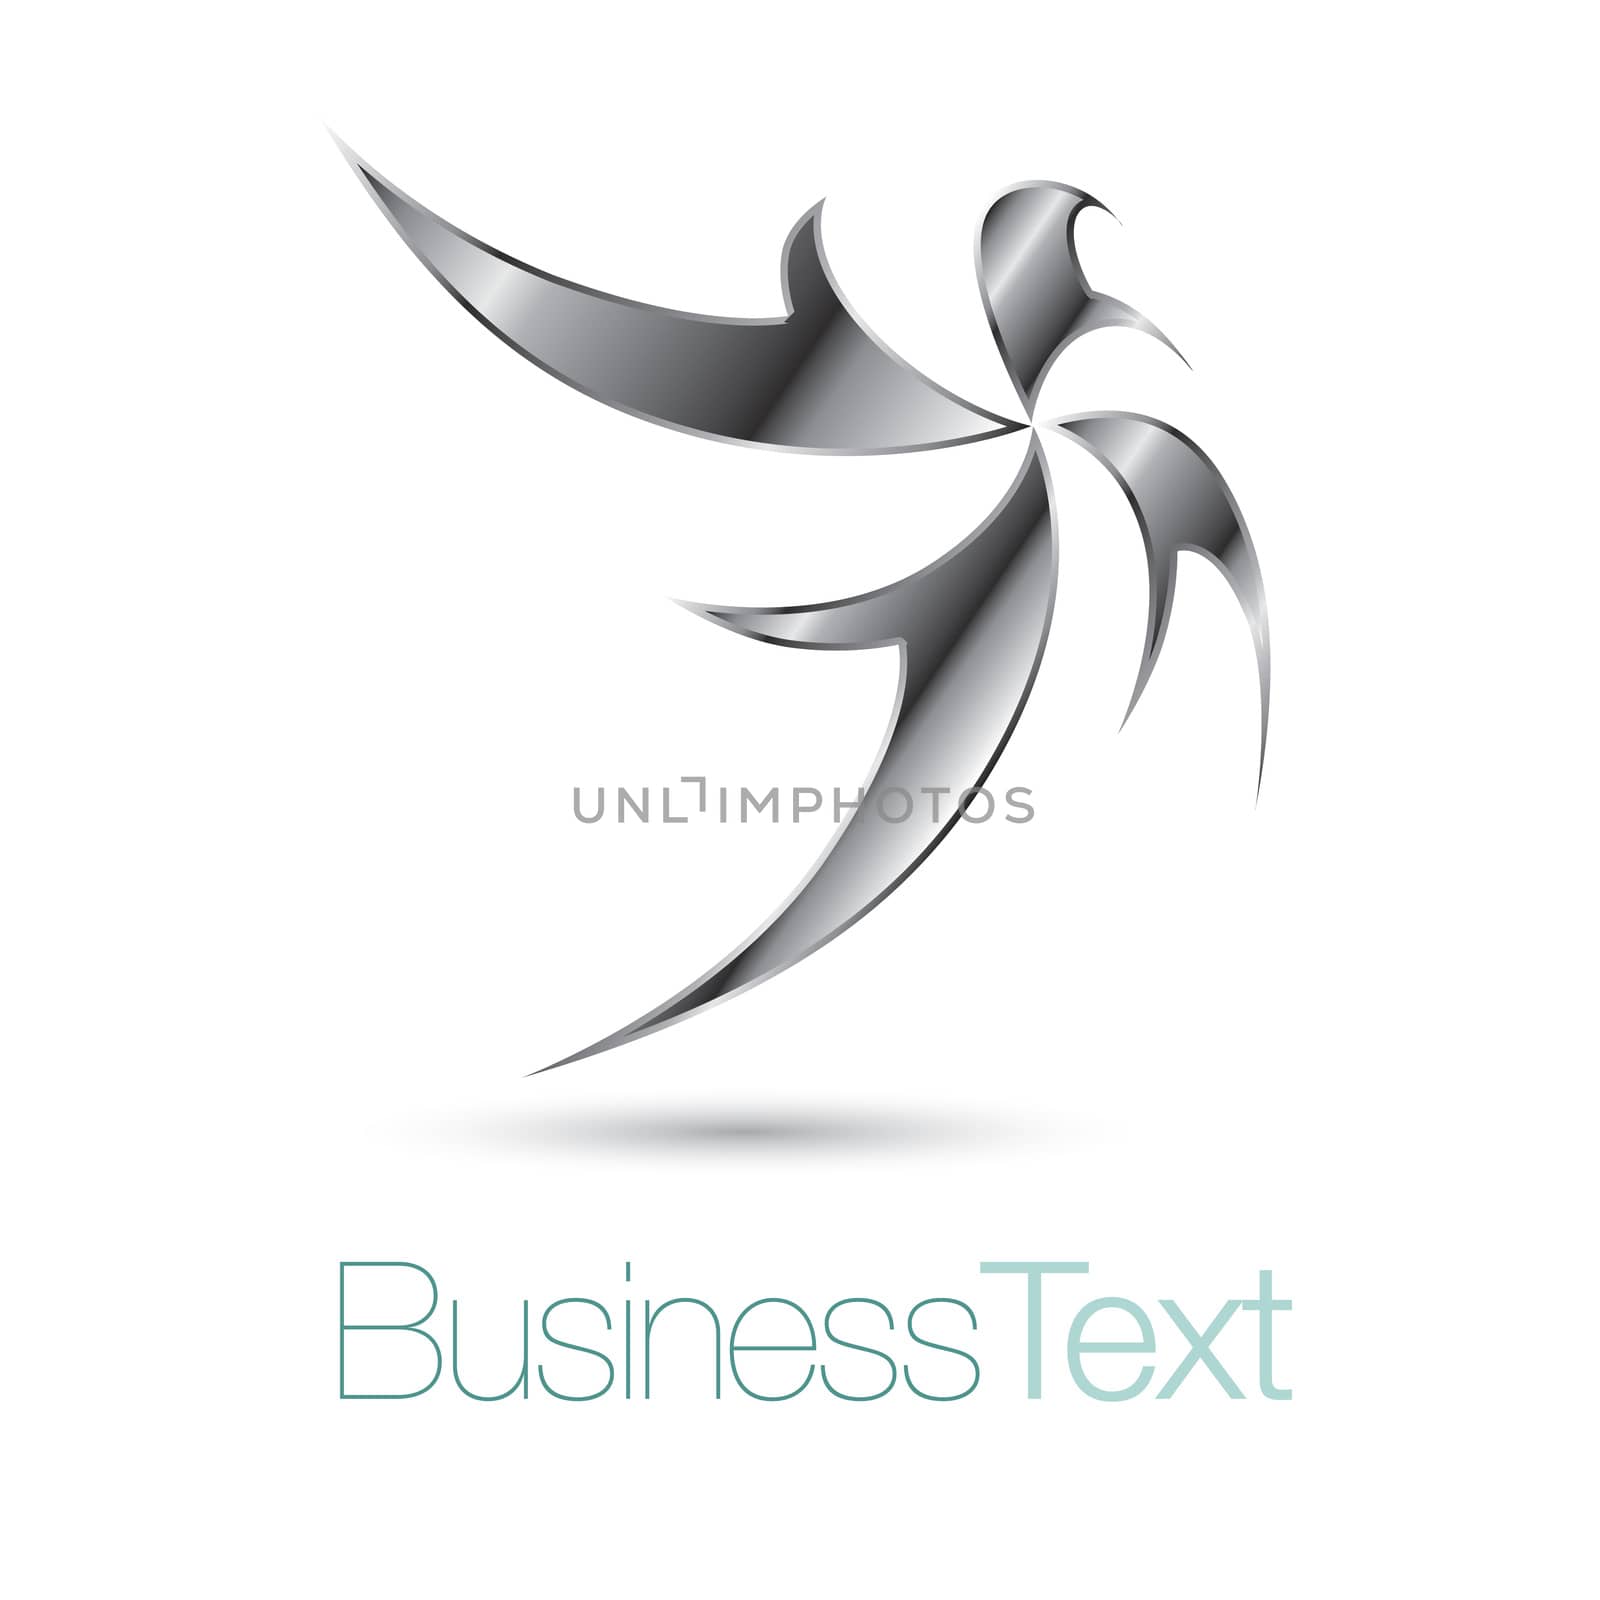 Abstract and stylized silver star business icon